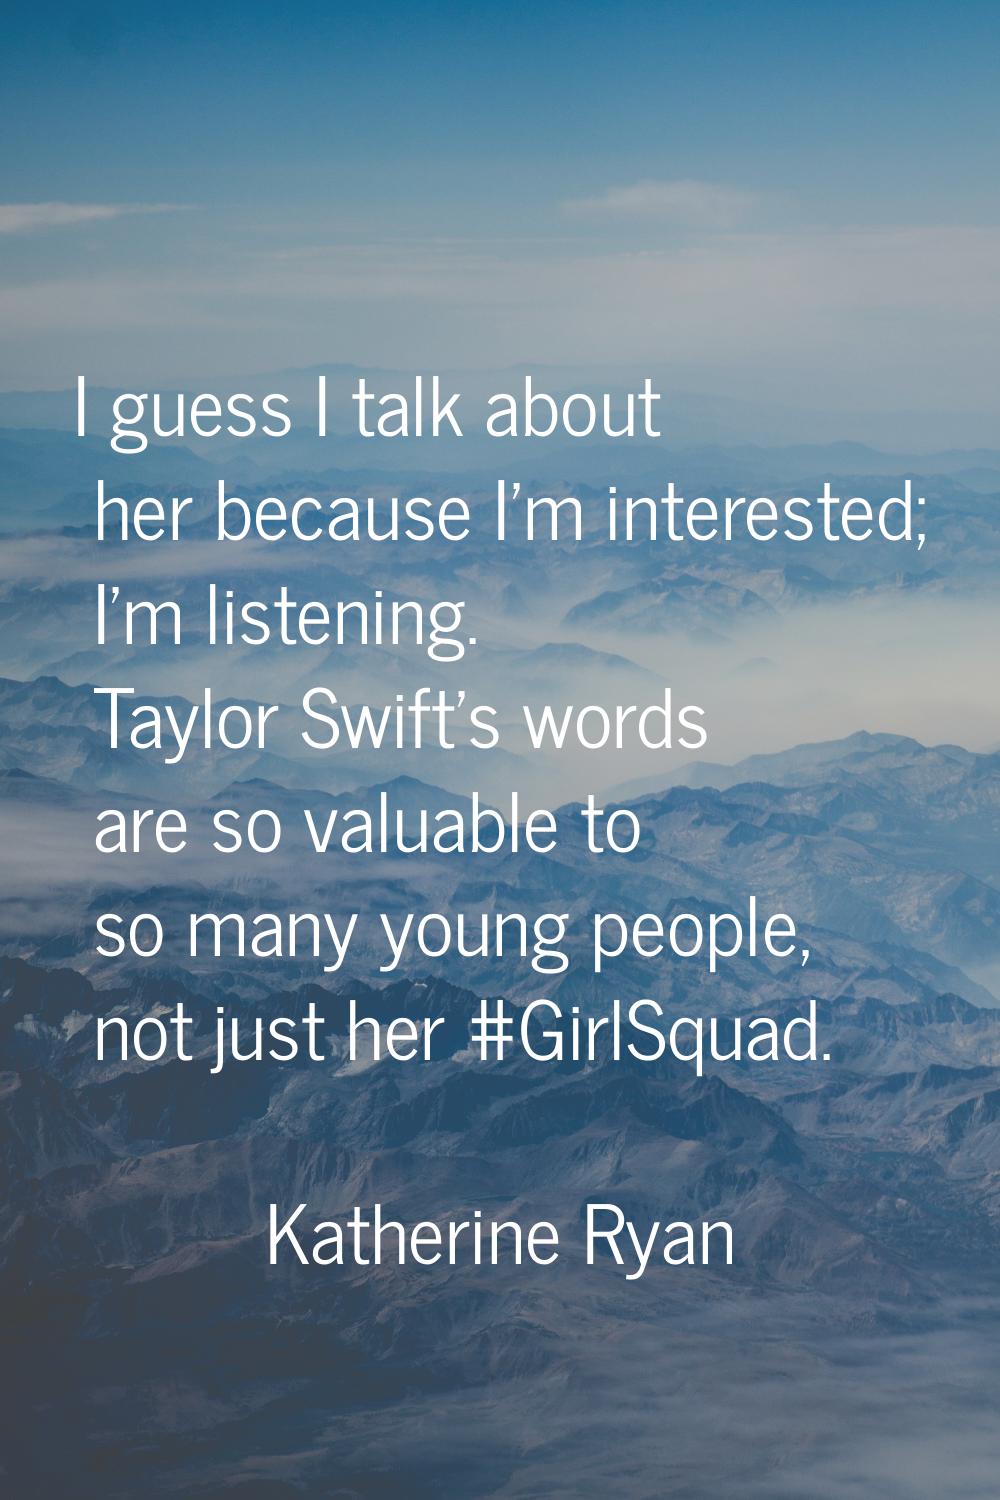 I guess I talk about her because I'm interested; I'm listening. Taylor Swift's words are so valuabl